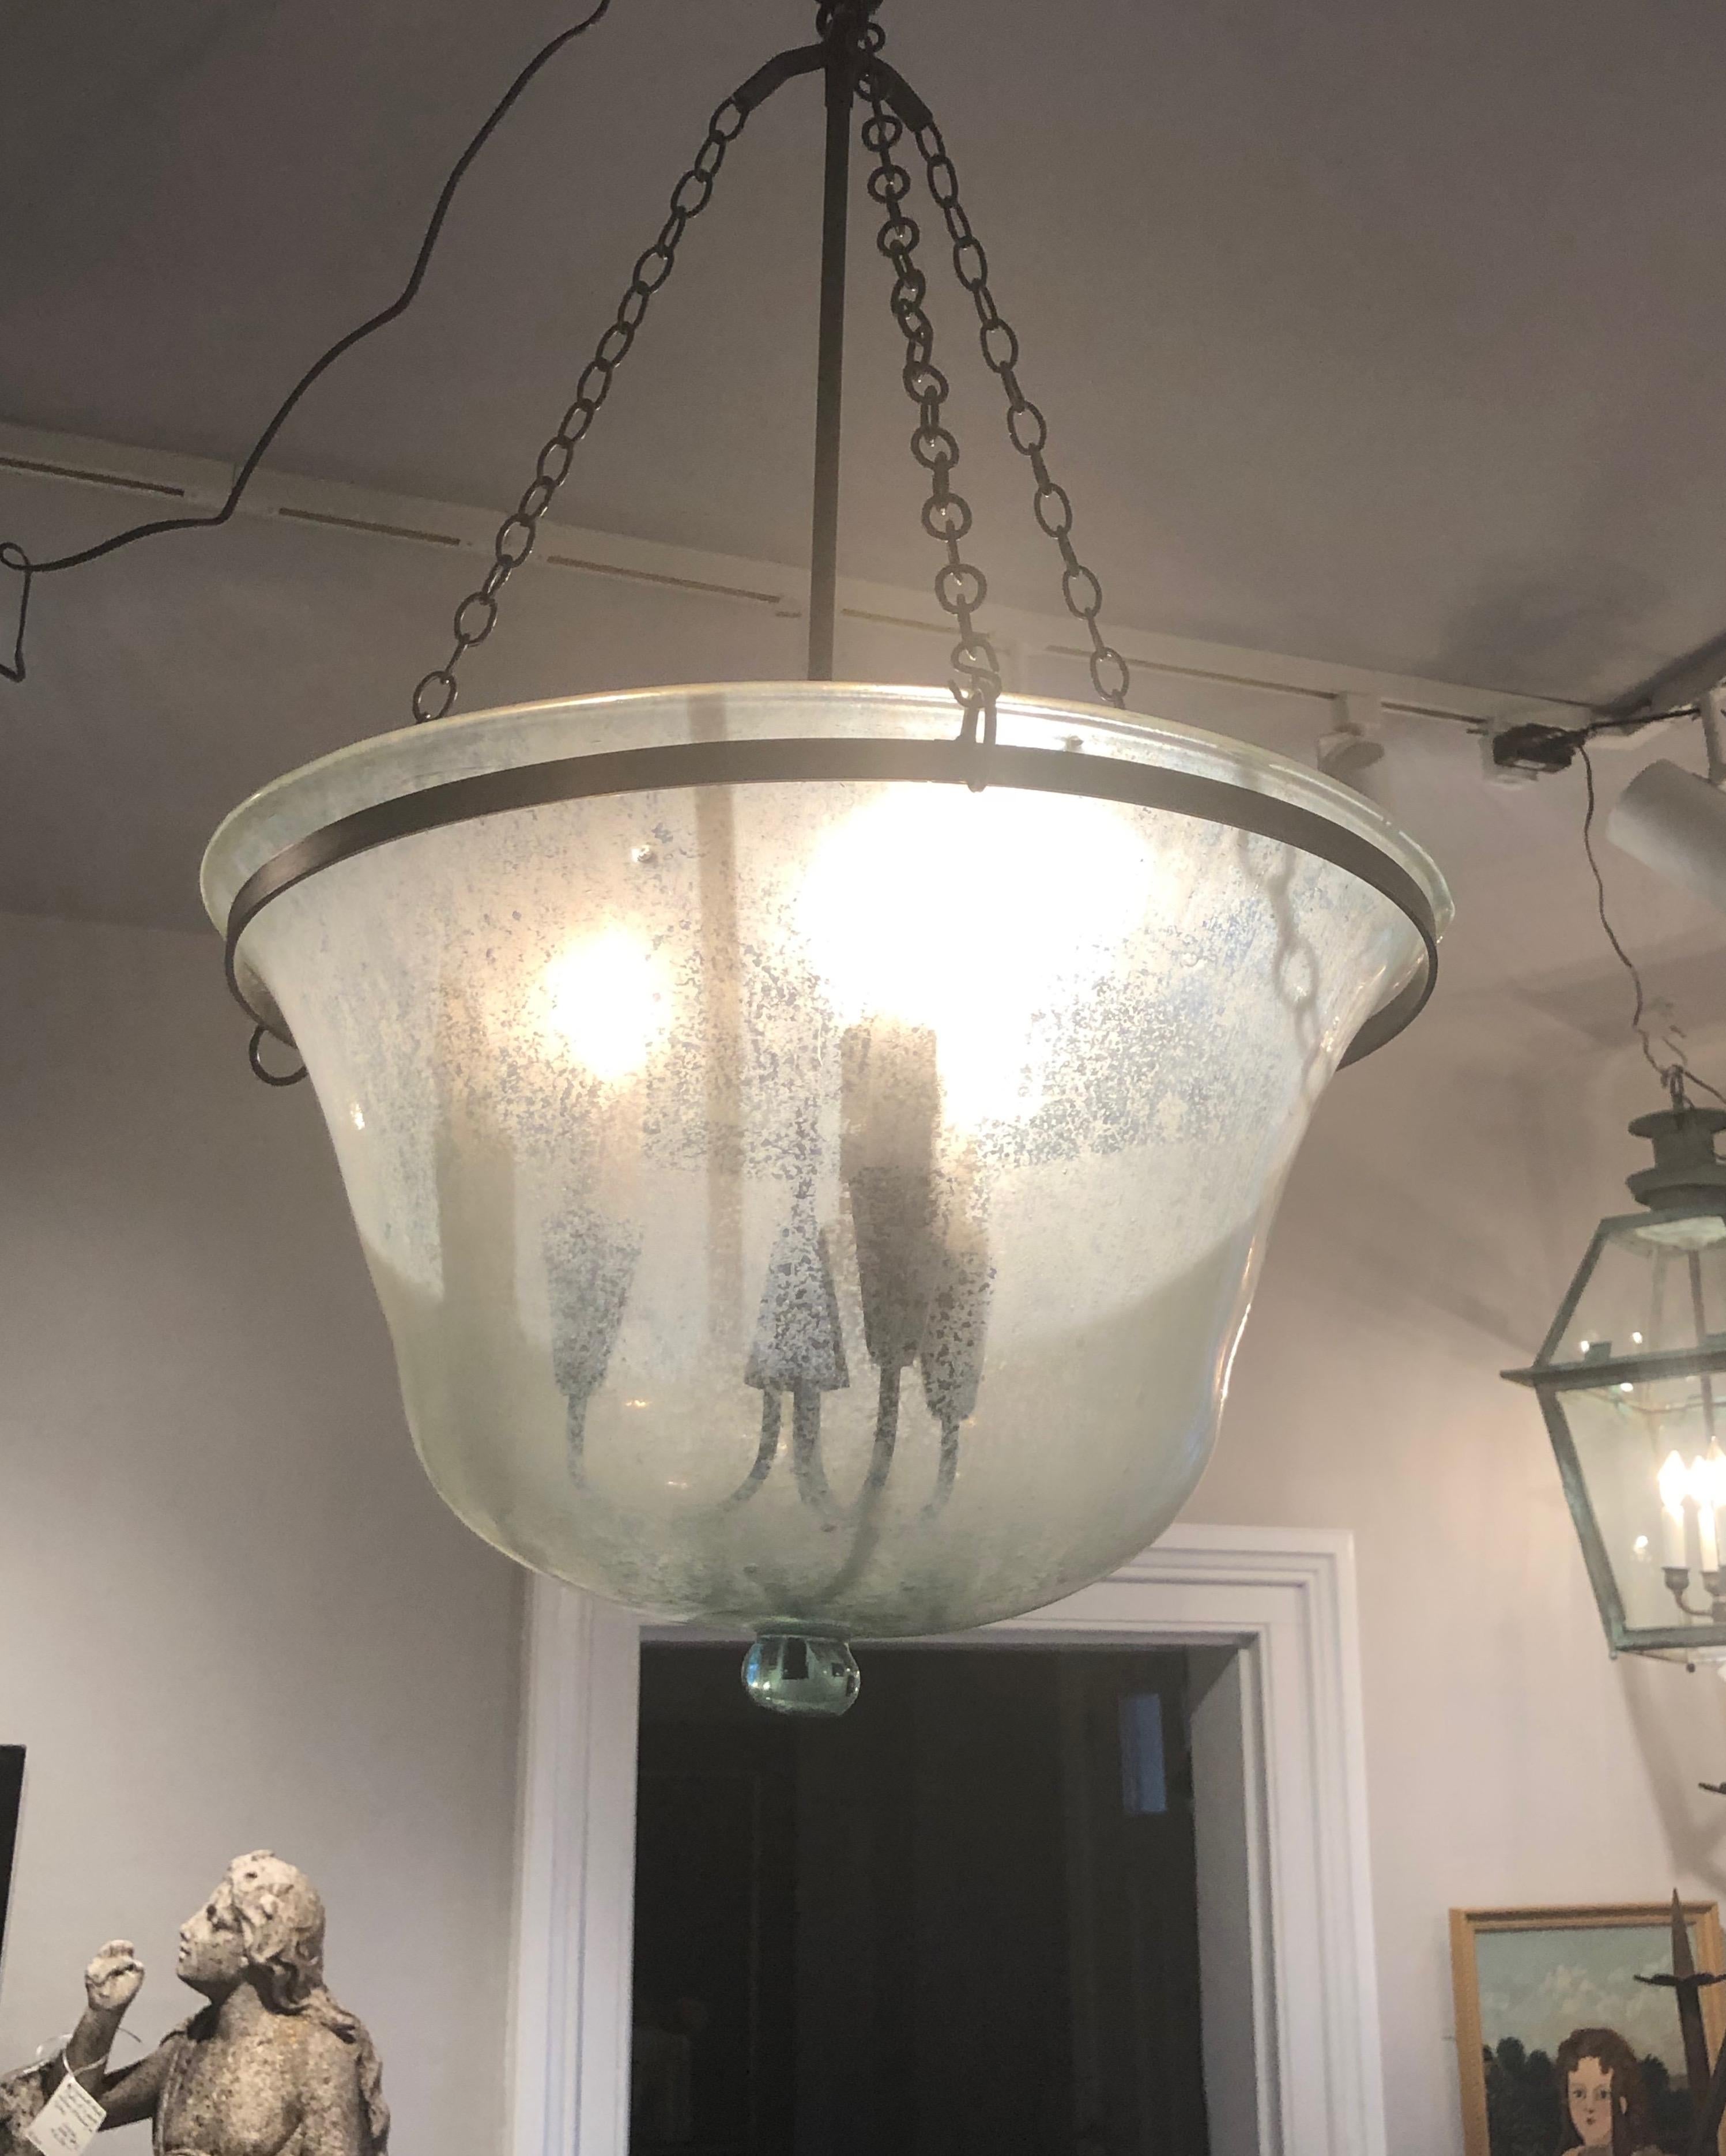 Hand-Crafted French Hand Blown 19th Century Melon Cloche Hanging Light